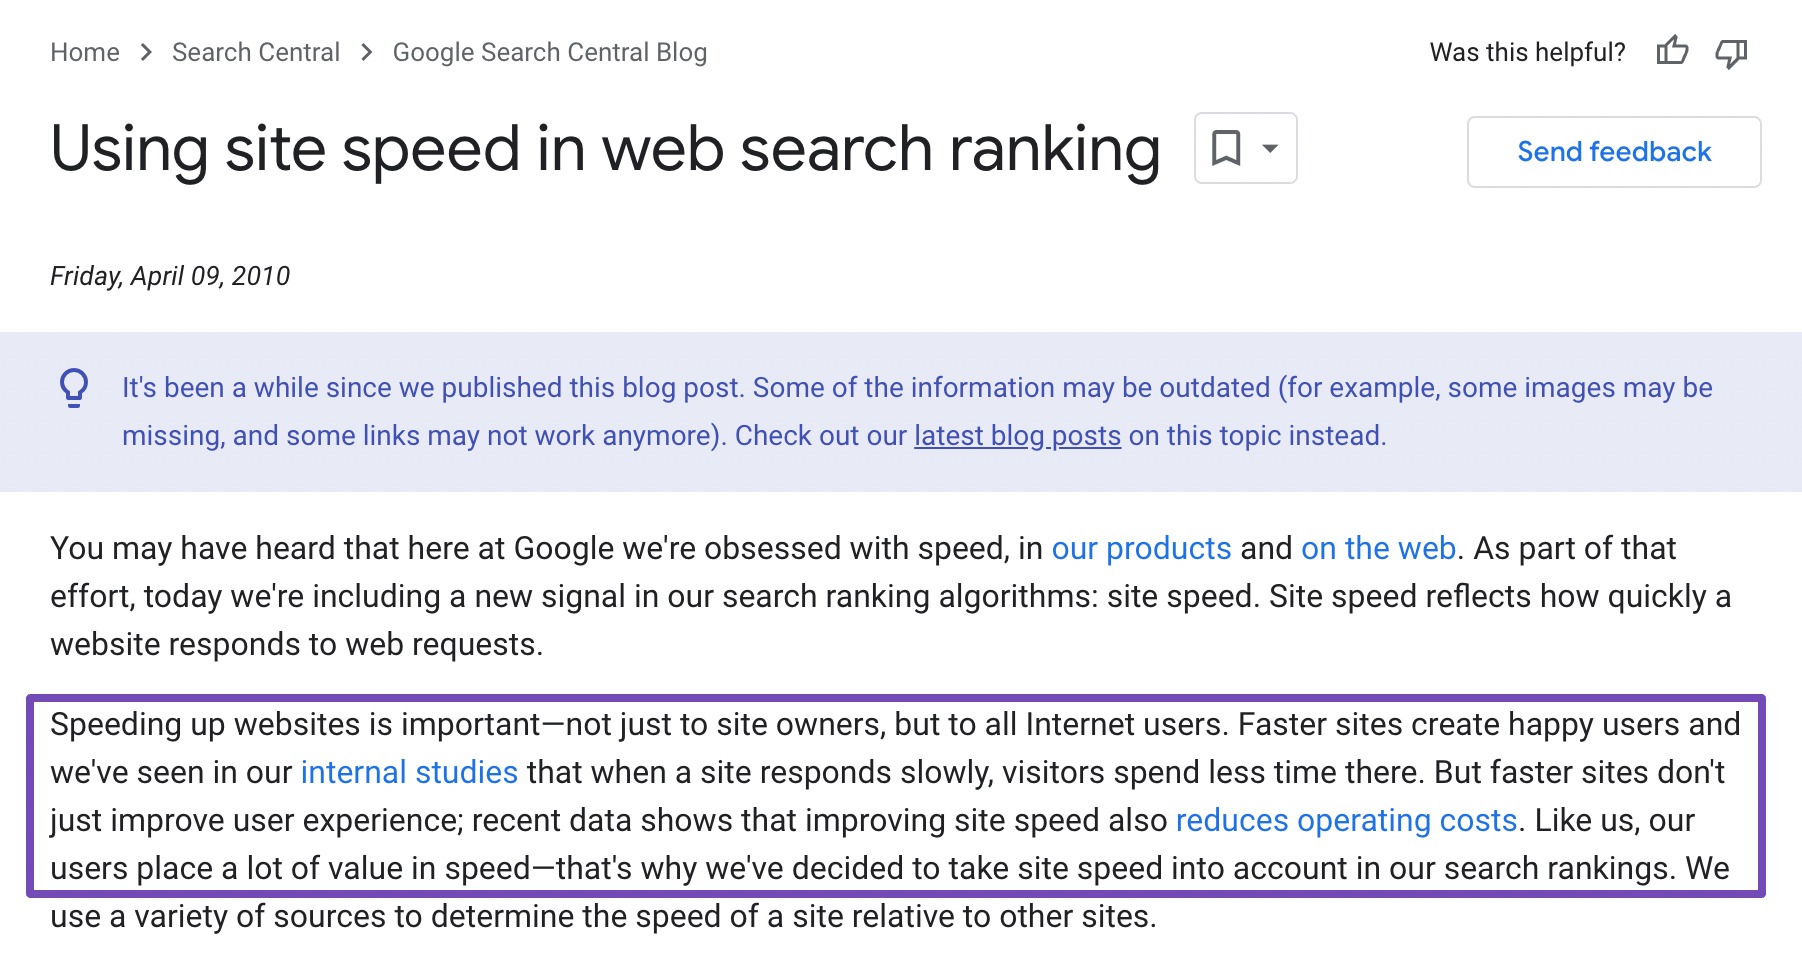 Google's site speed guidelines